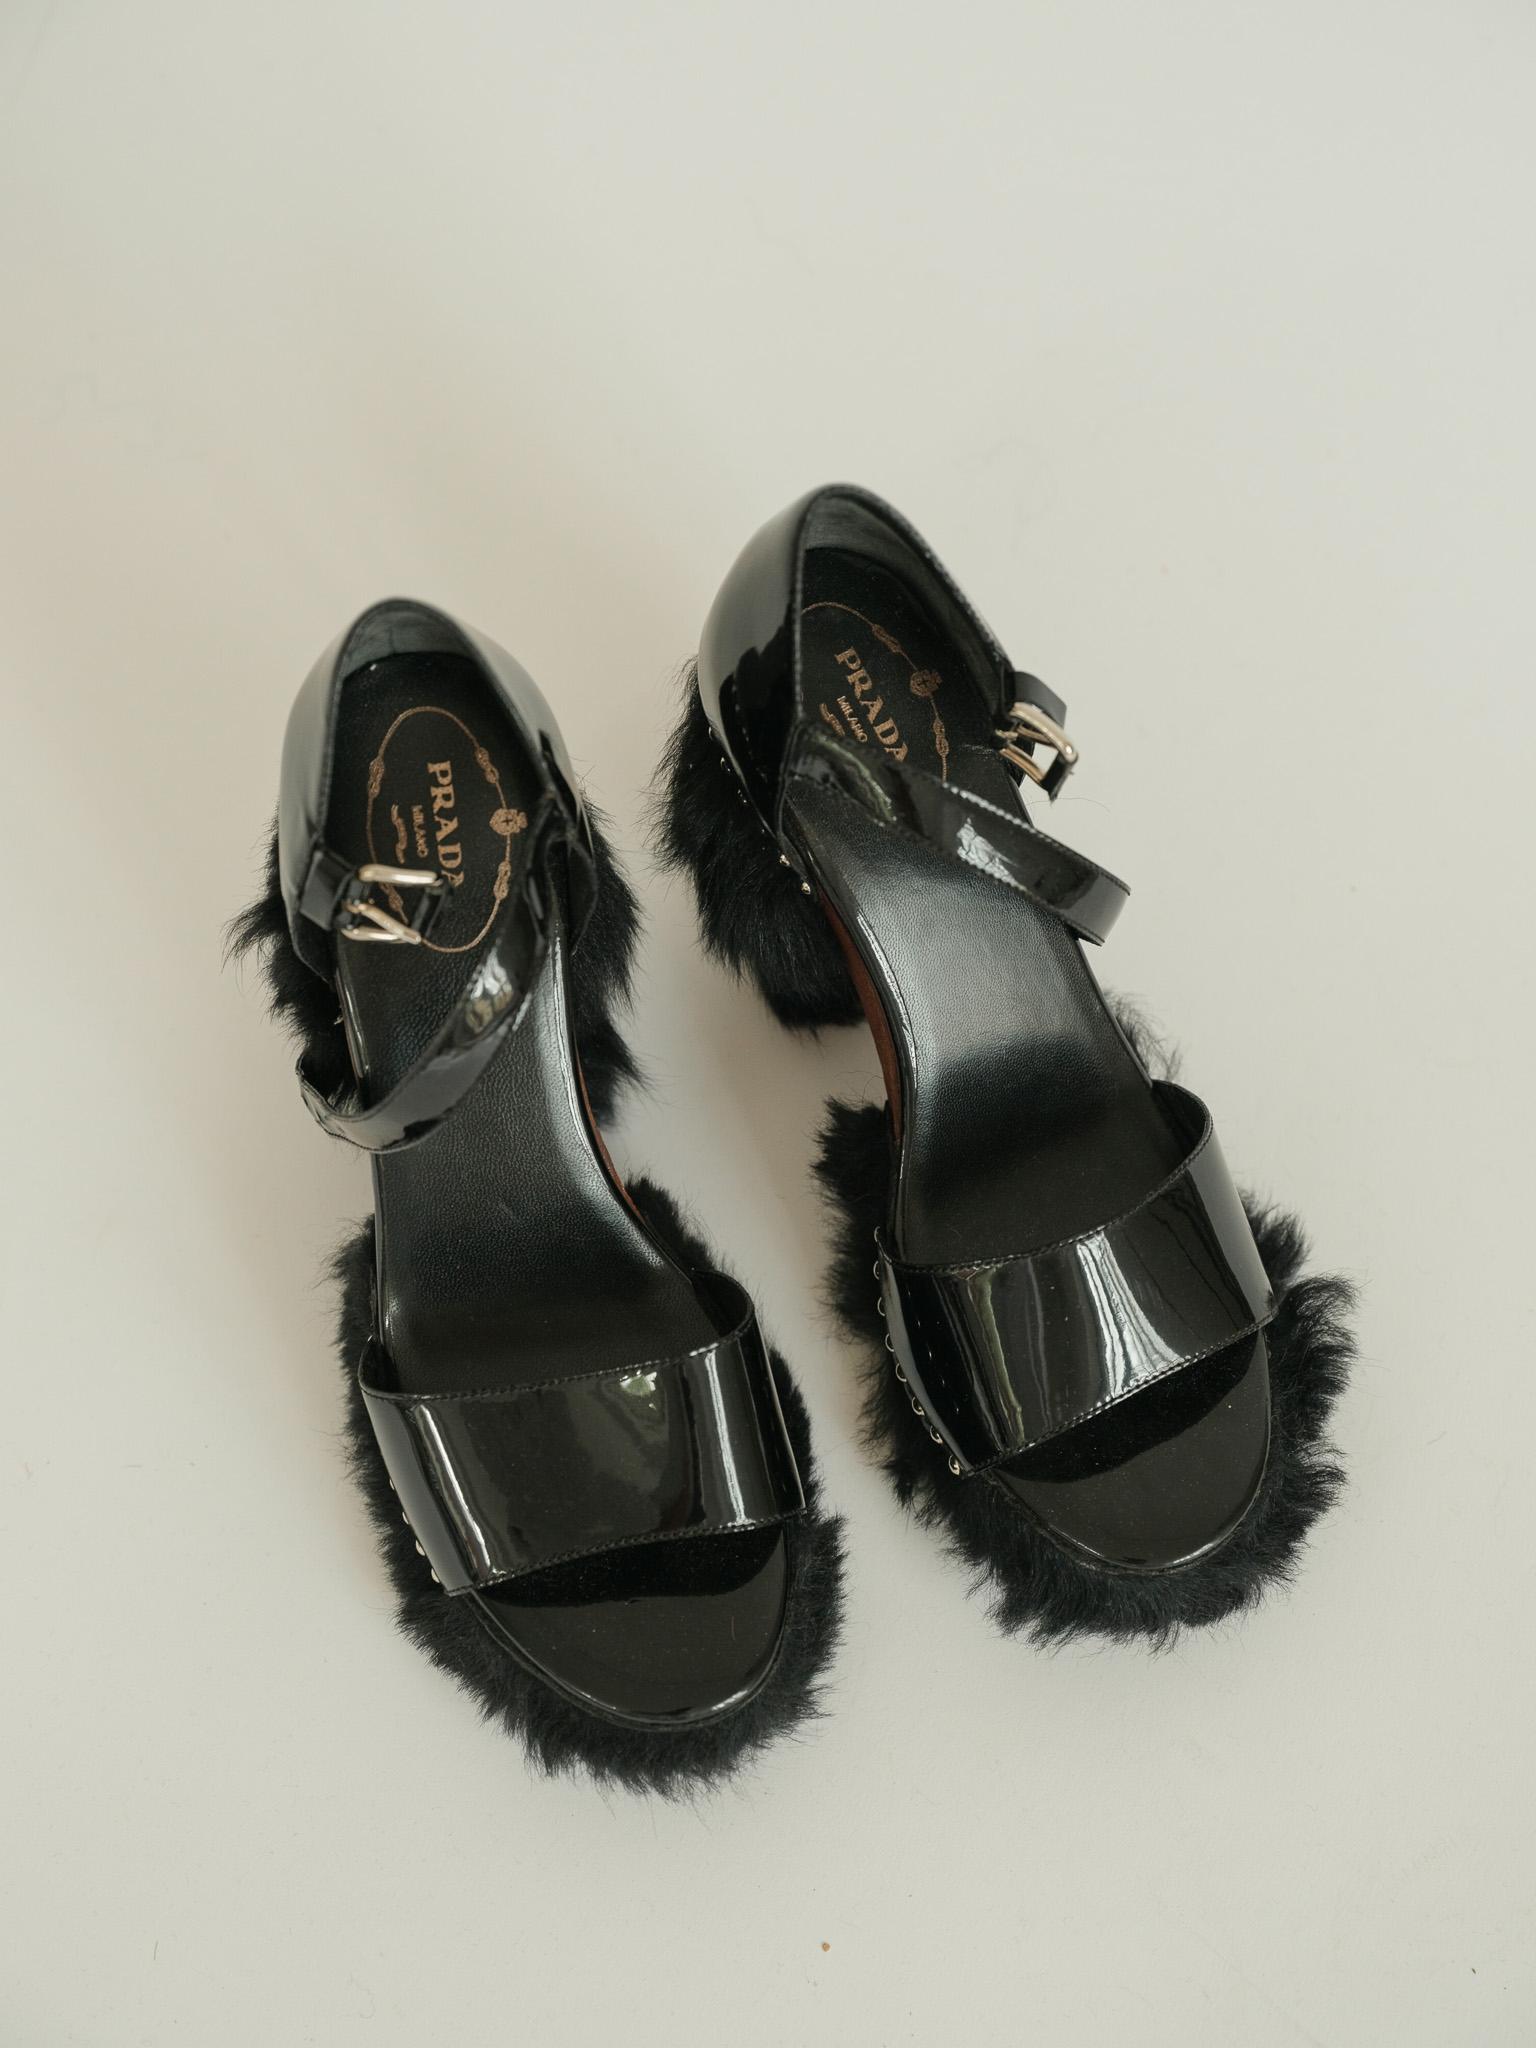 Vintage Prada Studded Pony Hair Patent Leather Heels size 39 In Excellent Condition For Sale In Berlin, DE